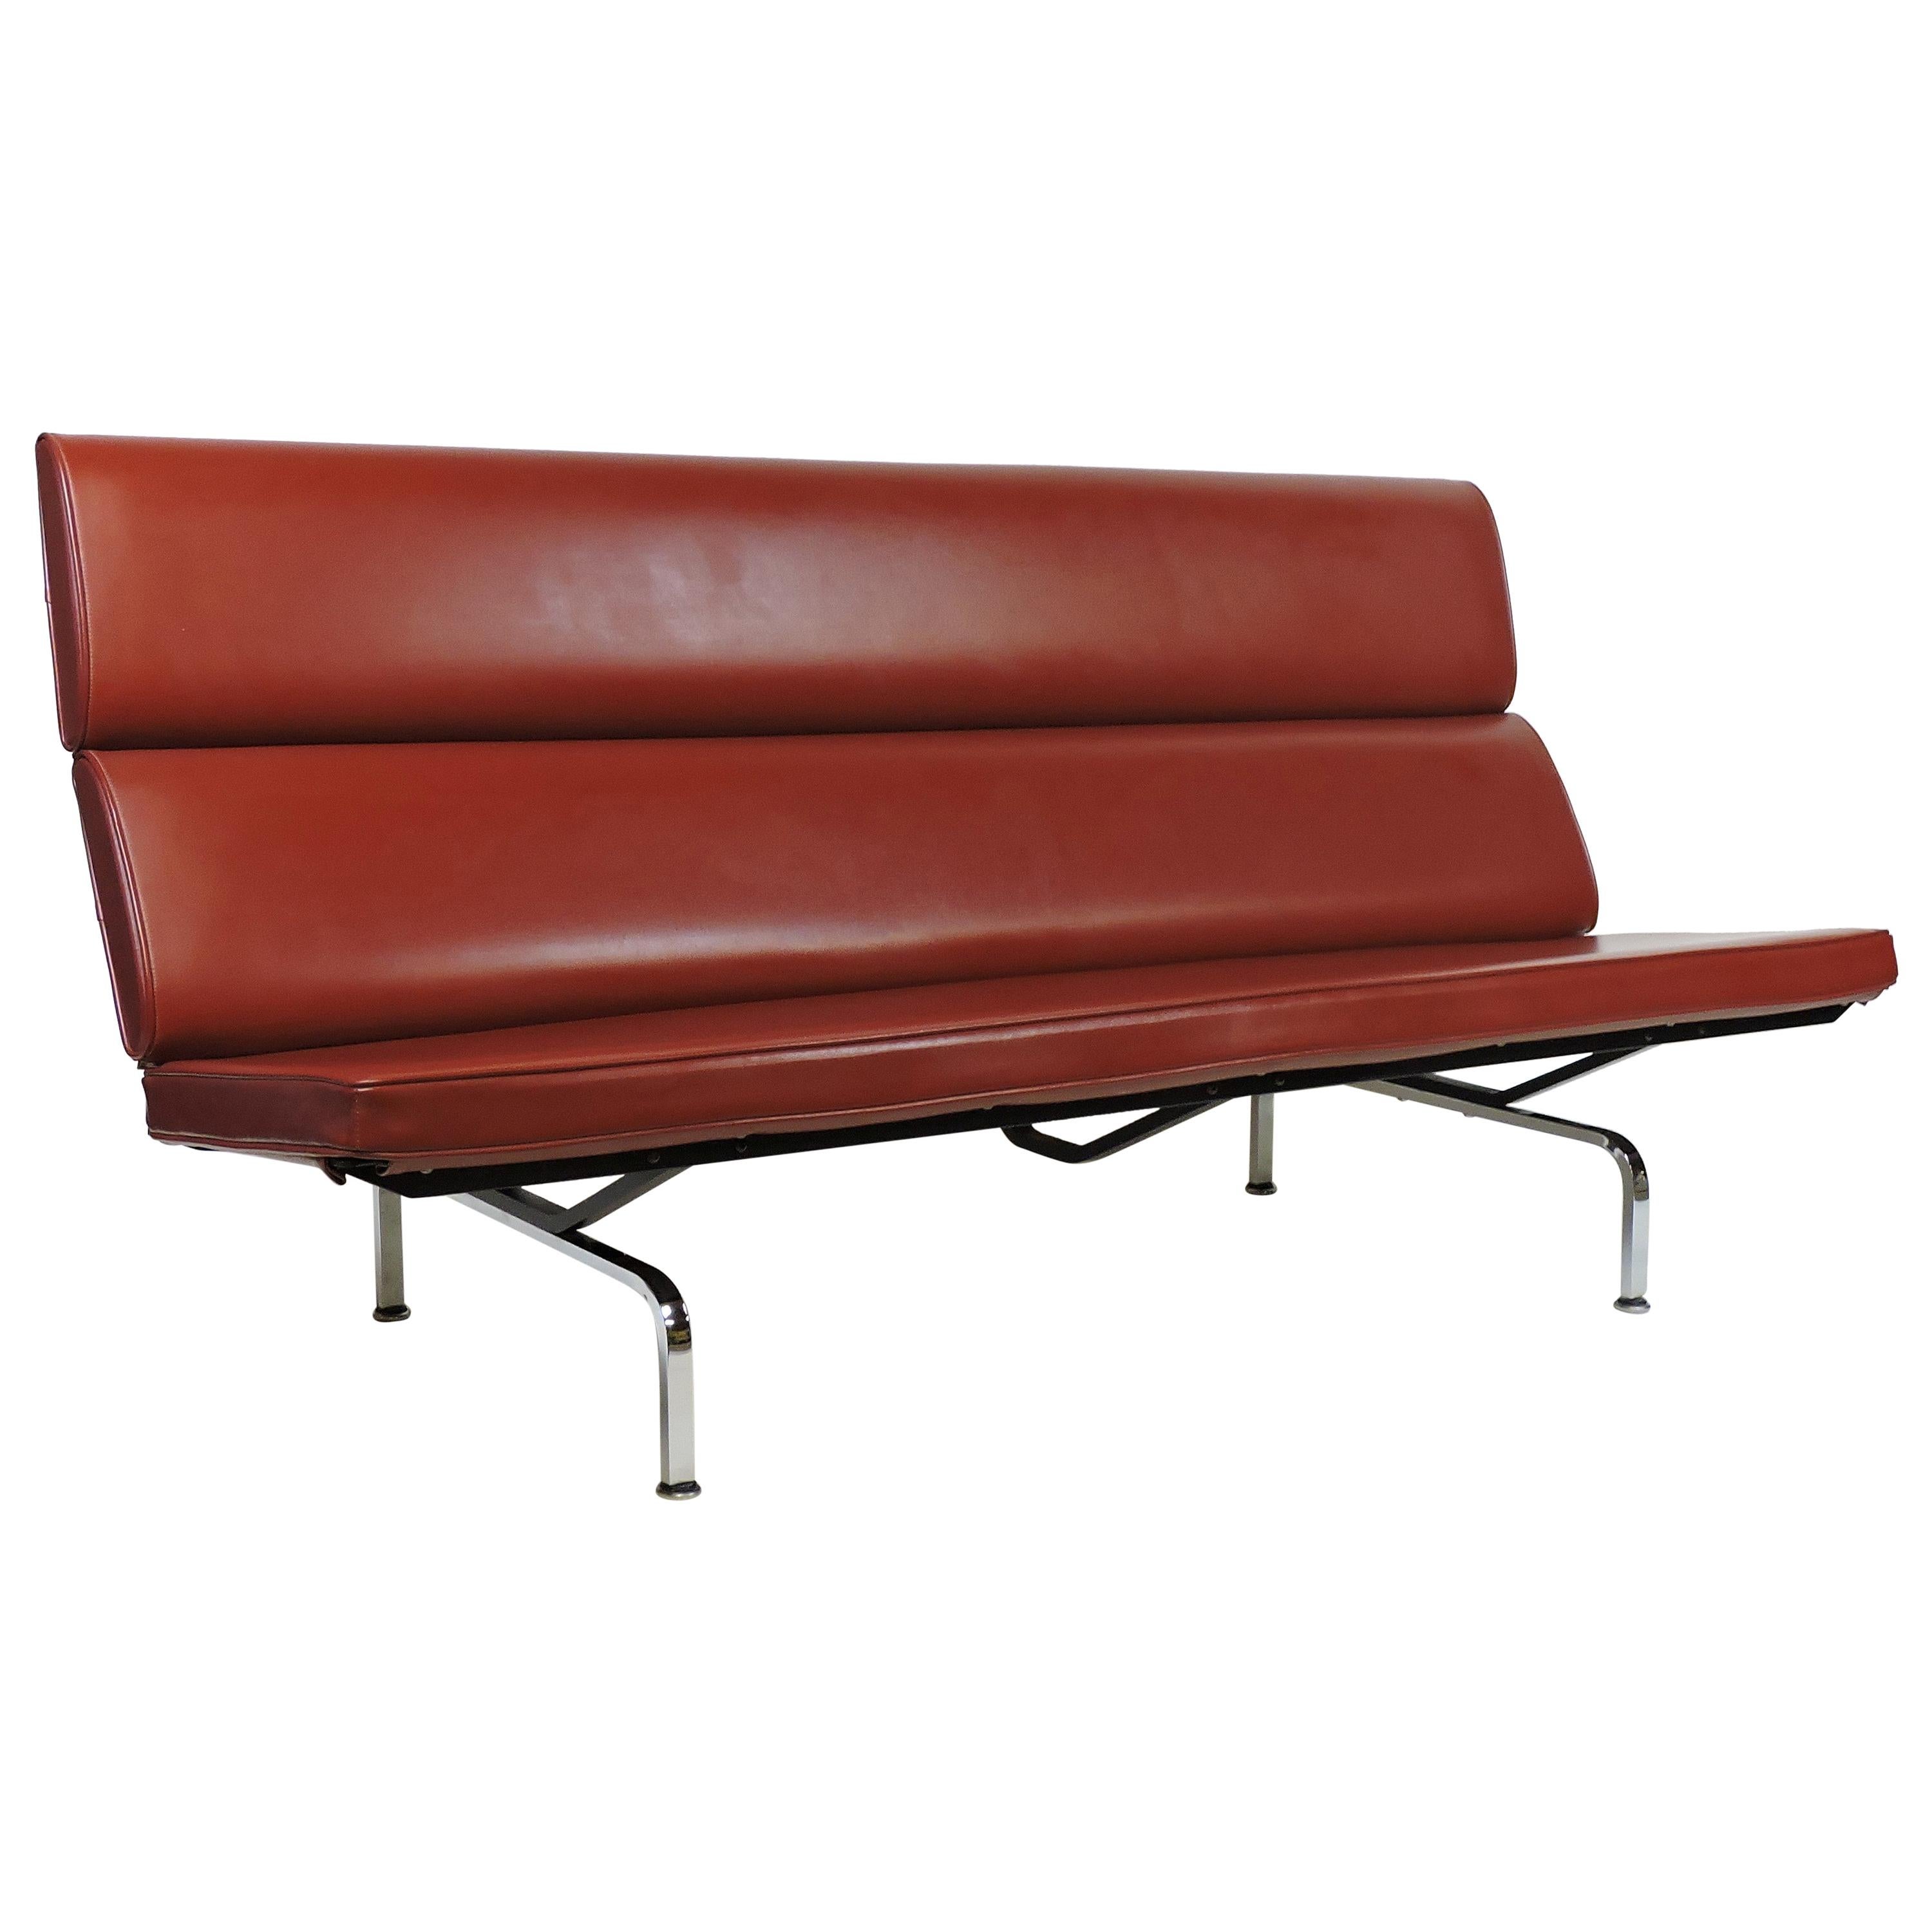 Eames Mid-Century Modern Compact Sofa by Herman Miller